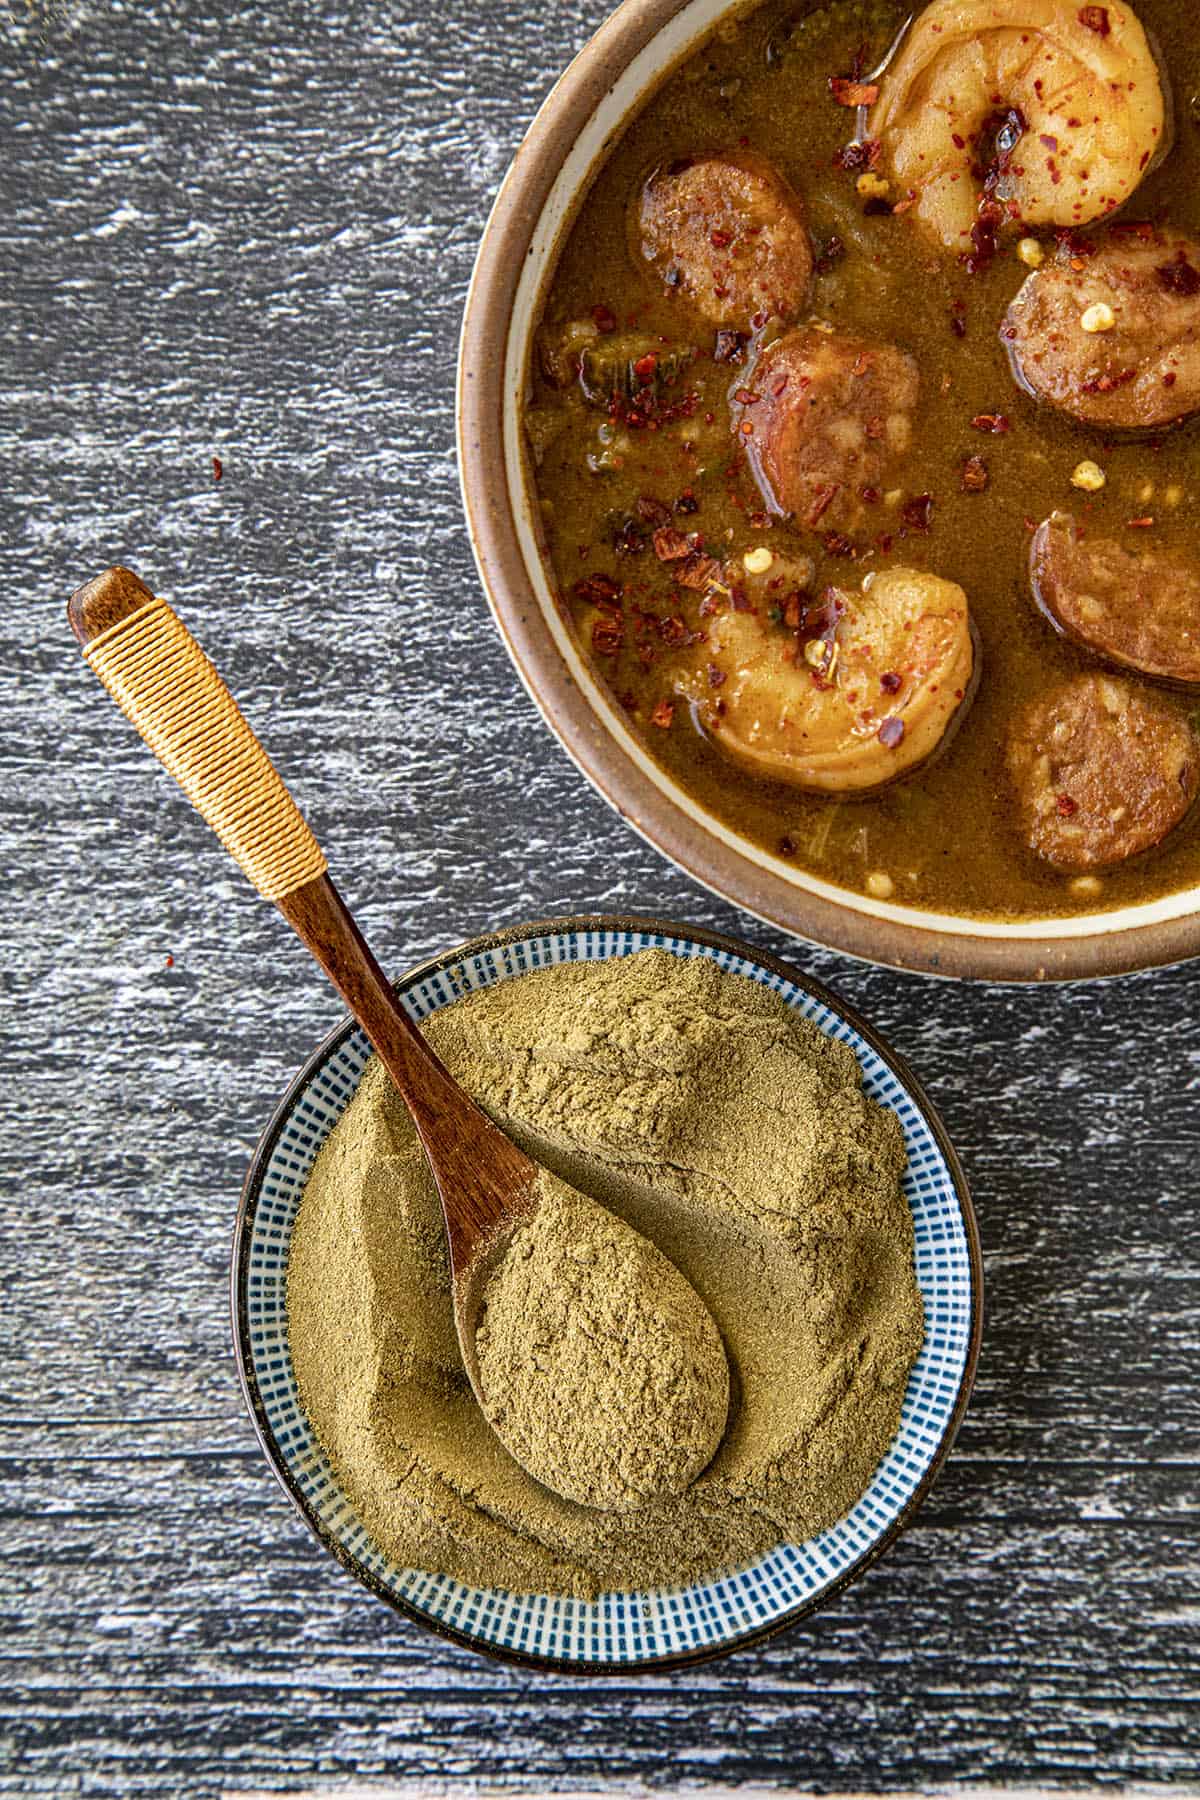 Gumbo File Powder with a bowl of gumbo